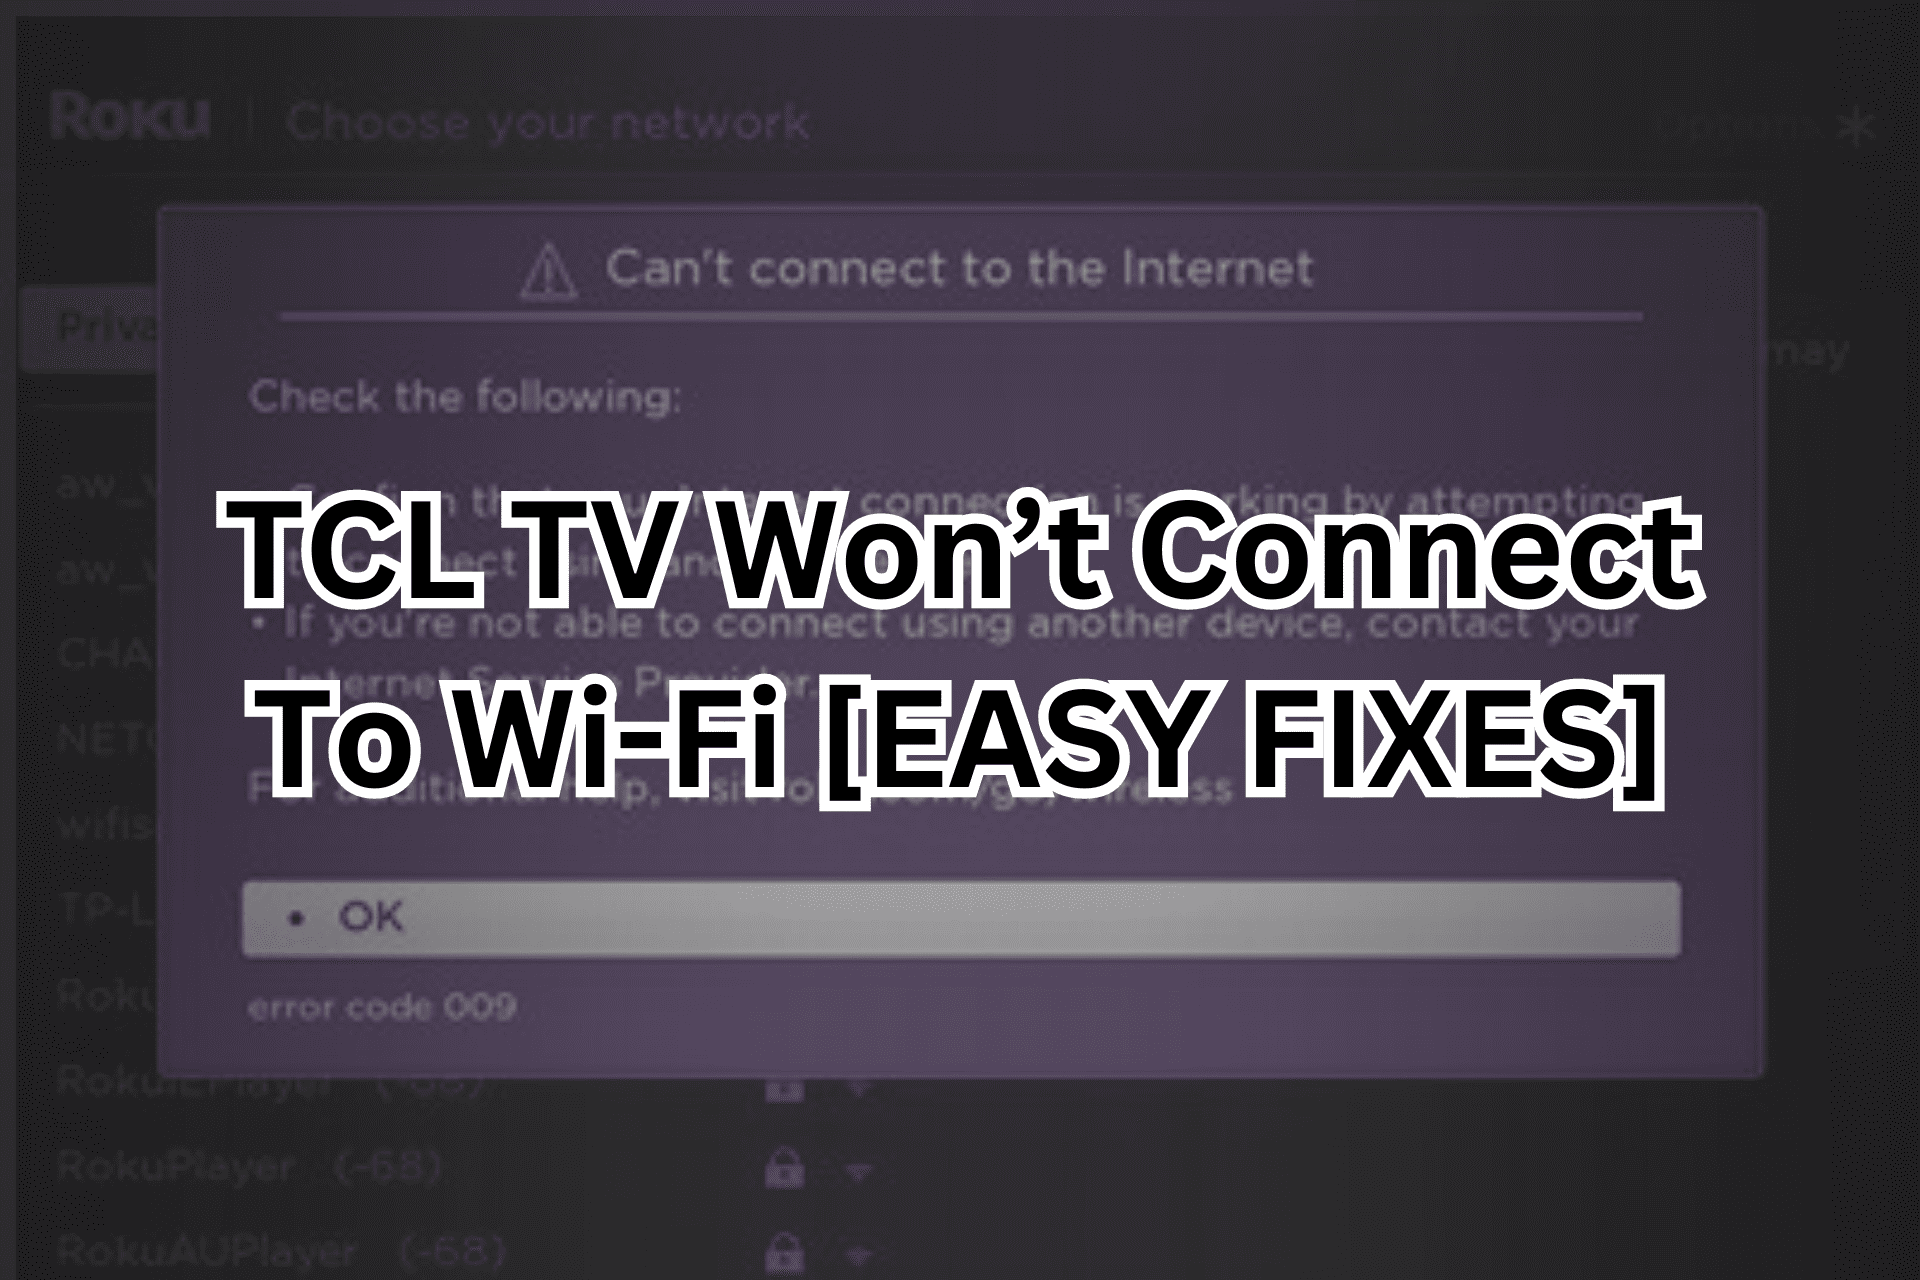 tcl tv won't connect to Wi-Fi